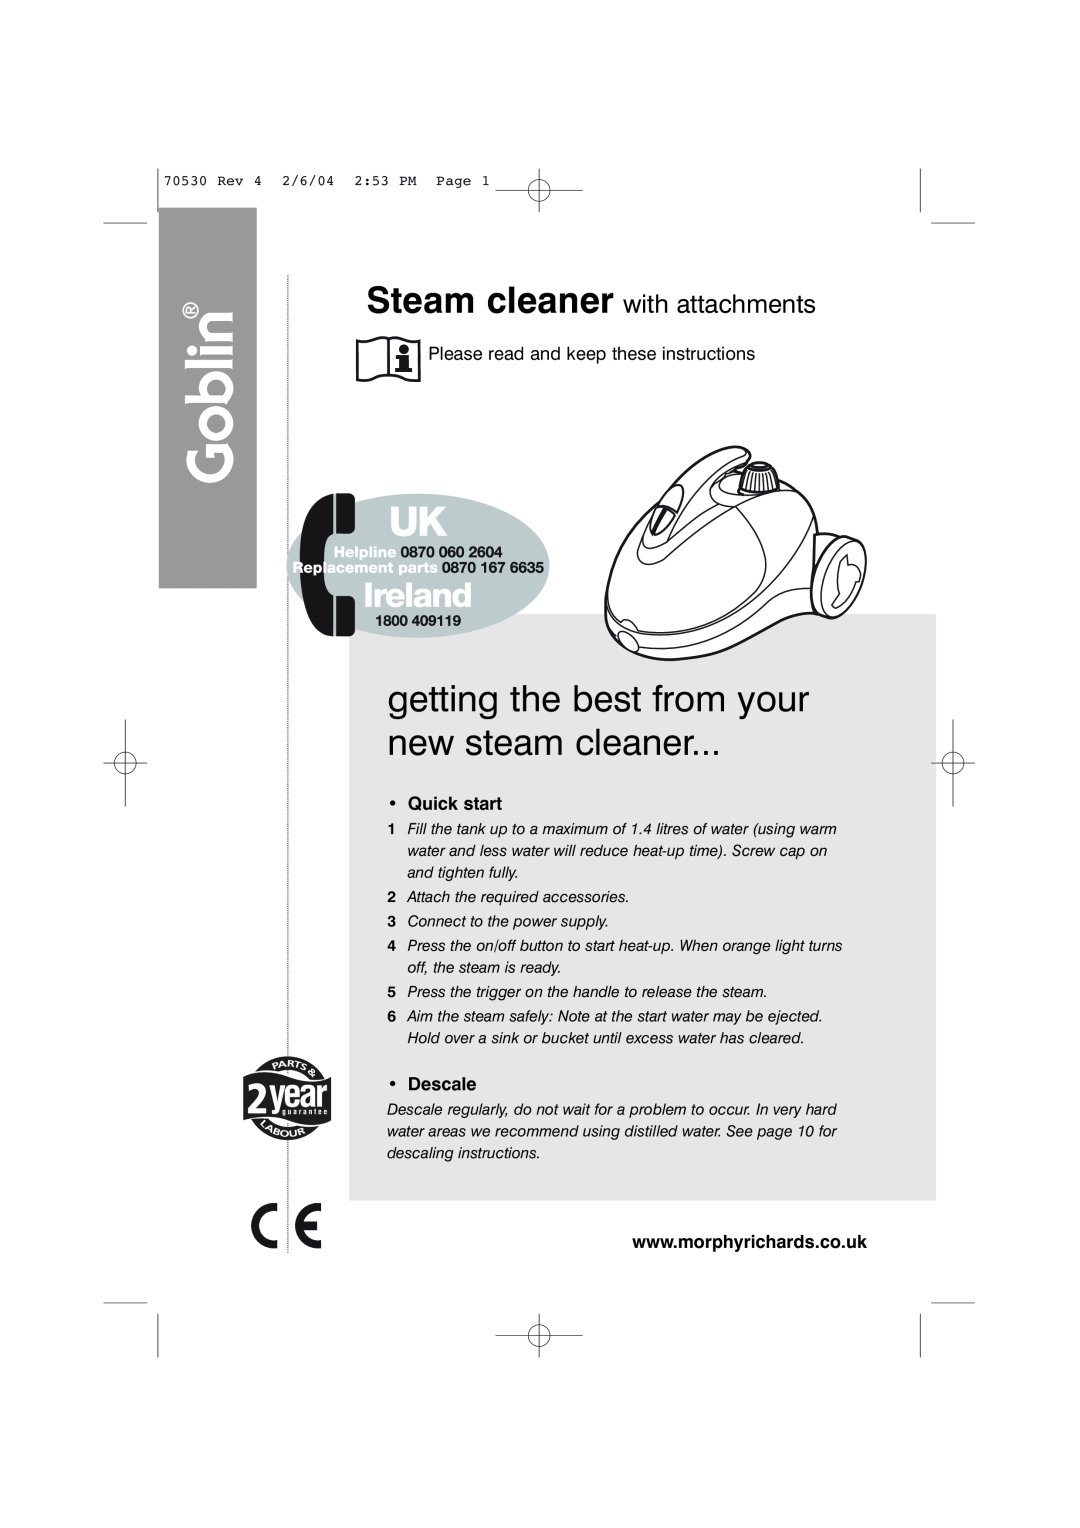 Morphy Richards quick start getting the best from your new steam cleaner, Steam cleaner with attachments, Quick start 